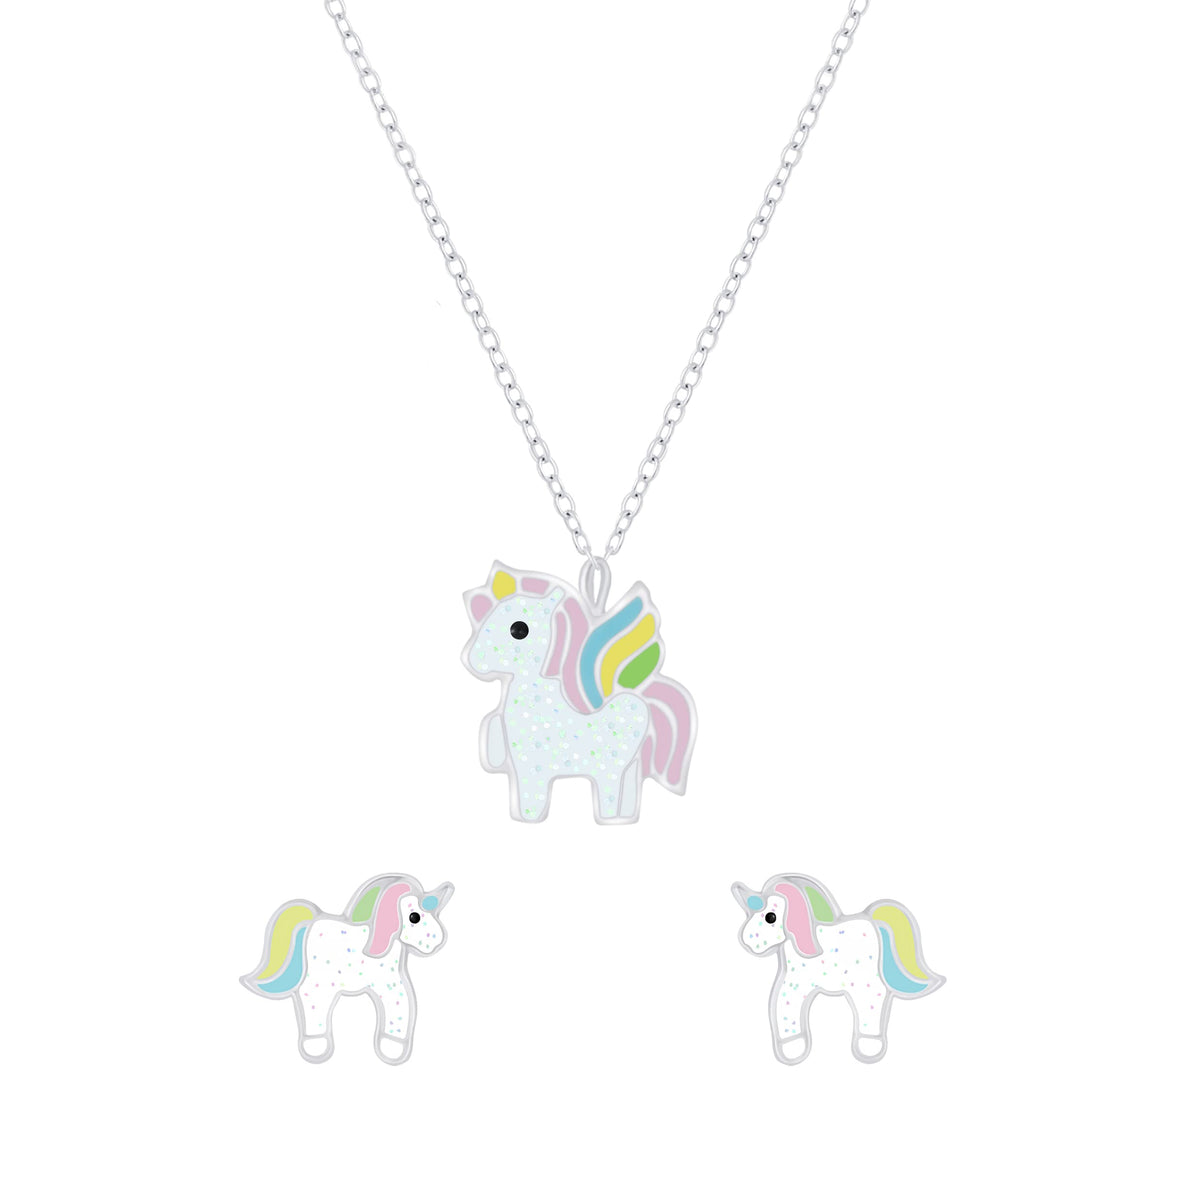 Raajsi by Yellow Chimes 925 Sterling Silver Pendant Set for Girls & Kids Melbees Kids Collection Unicorn Design | Birthday Gift for Girls Kids | With Certificate of Authenticity & 6 Month Warranty